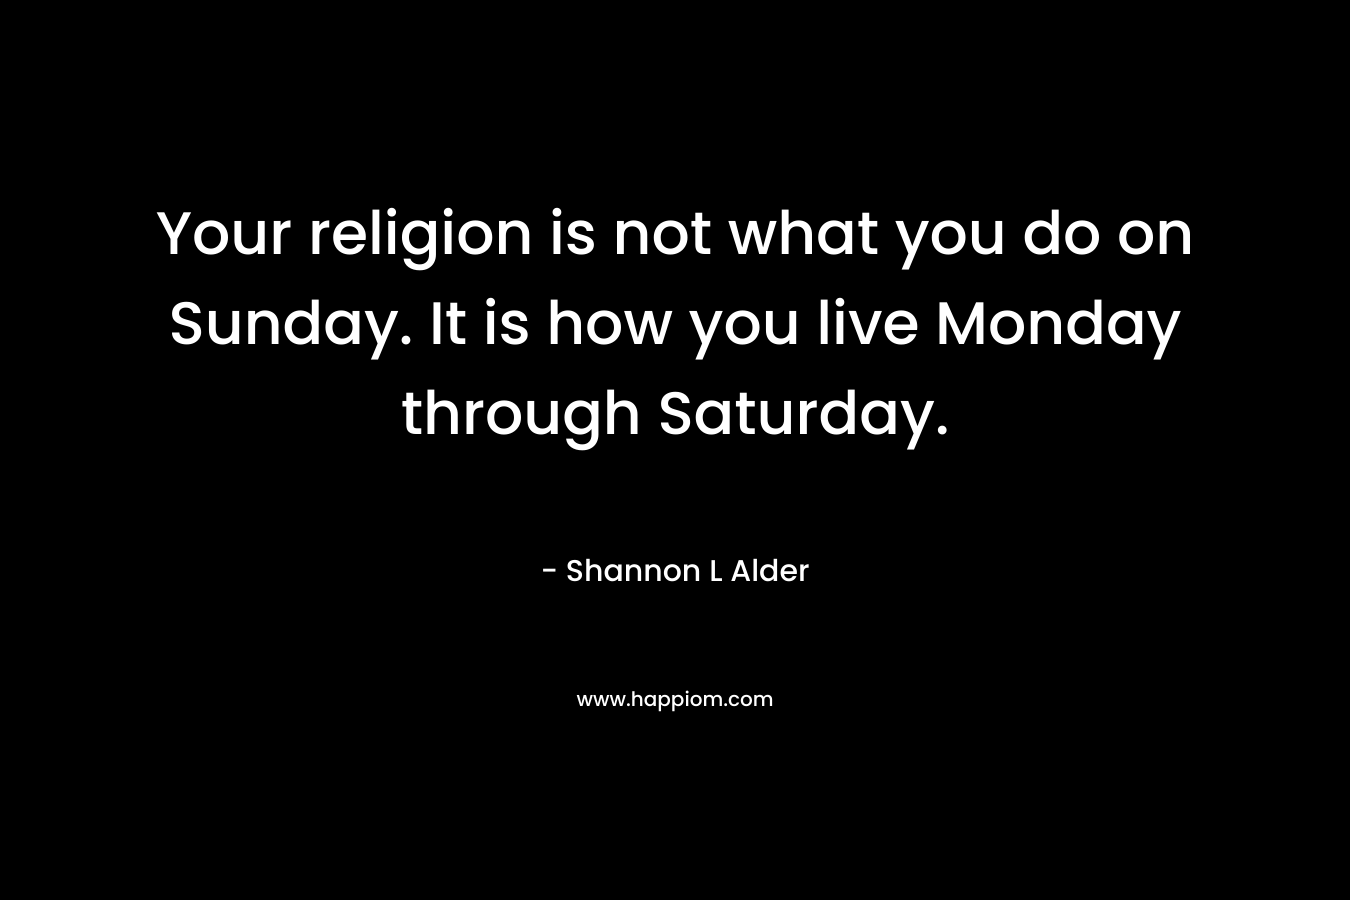 Your religion is not what you do on Sunday. It is how you live Monday through Saturday.